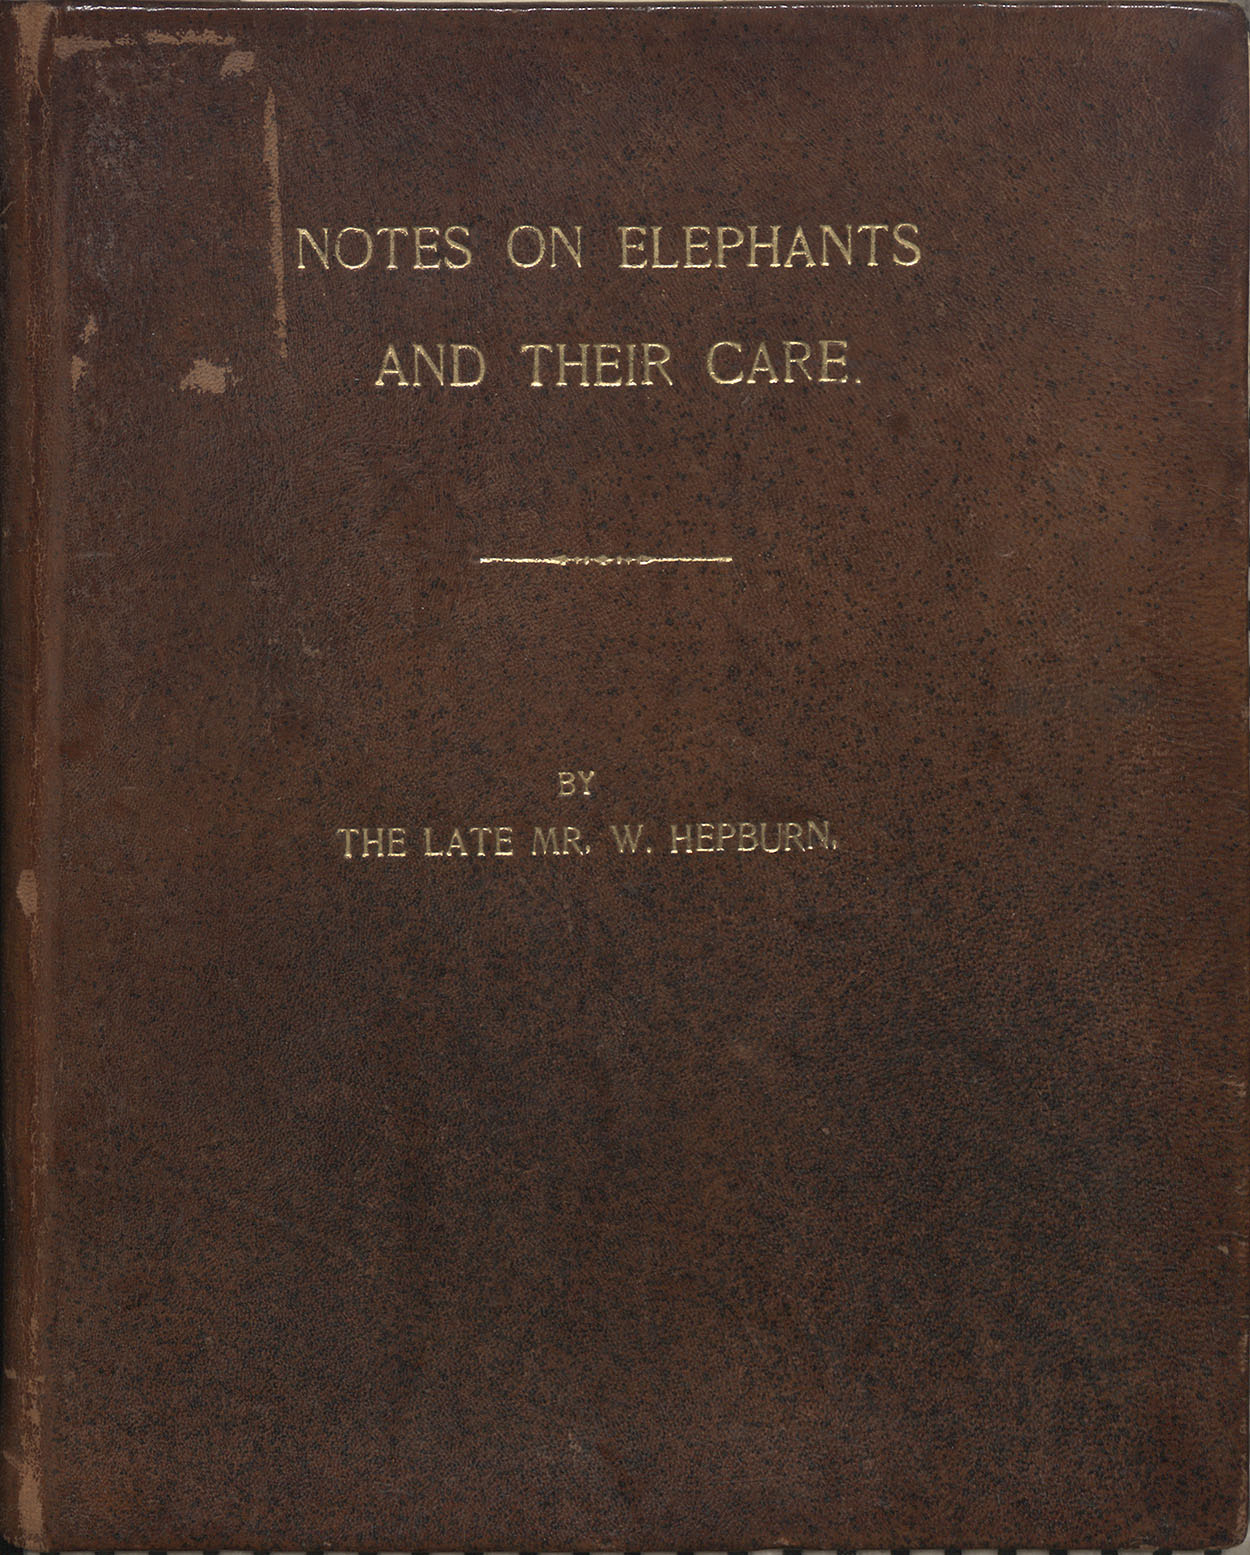 Notes on elephants and their care